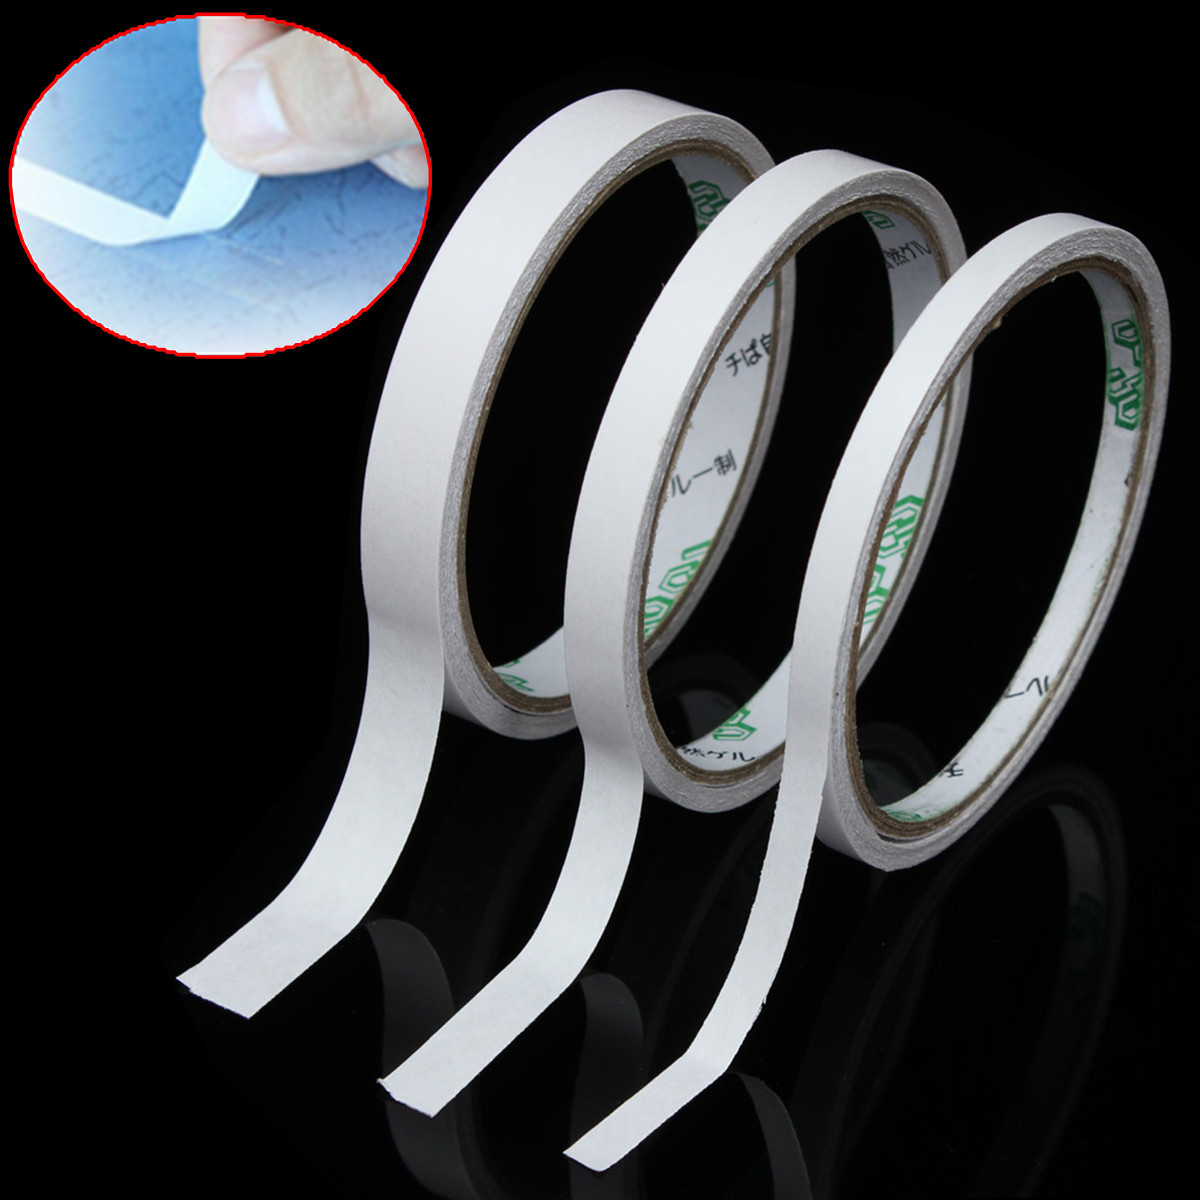 9m-Roll-Transparent-Clear-Double-Sided-Self-Adhesive-Tape-For-Craft-Packaging-1038948